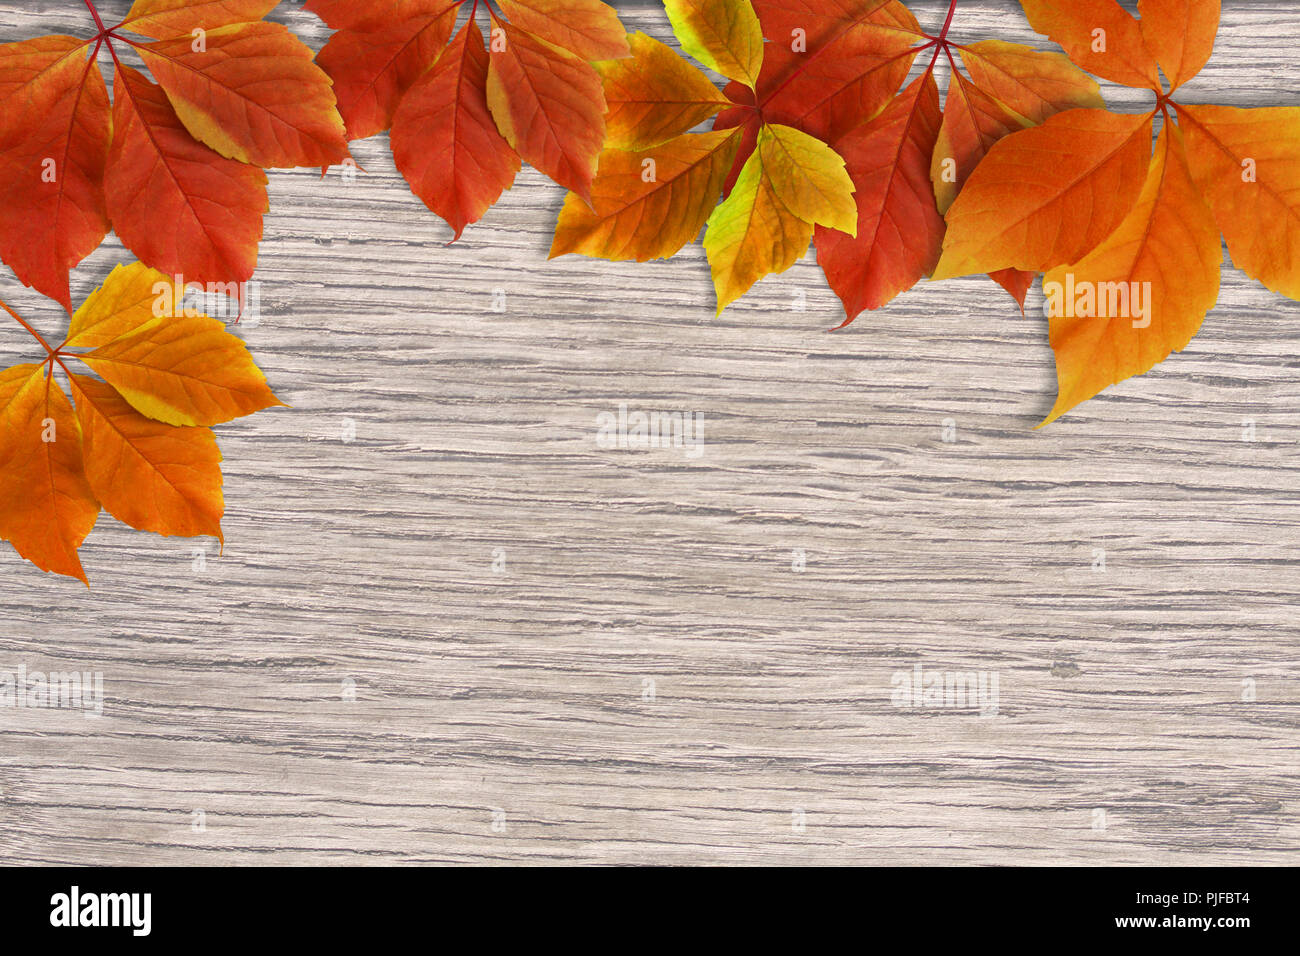 Autumn background. Colorful red and orange fall leaves on wood background with copy space for writing Stock Photo